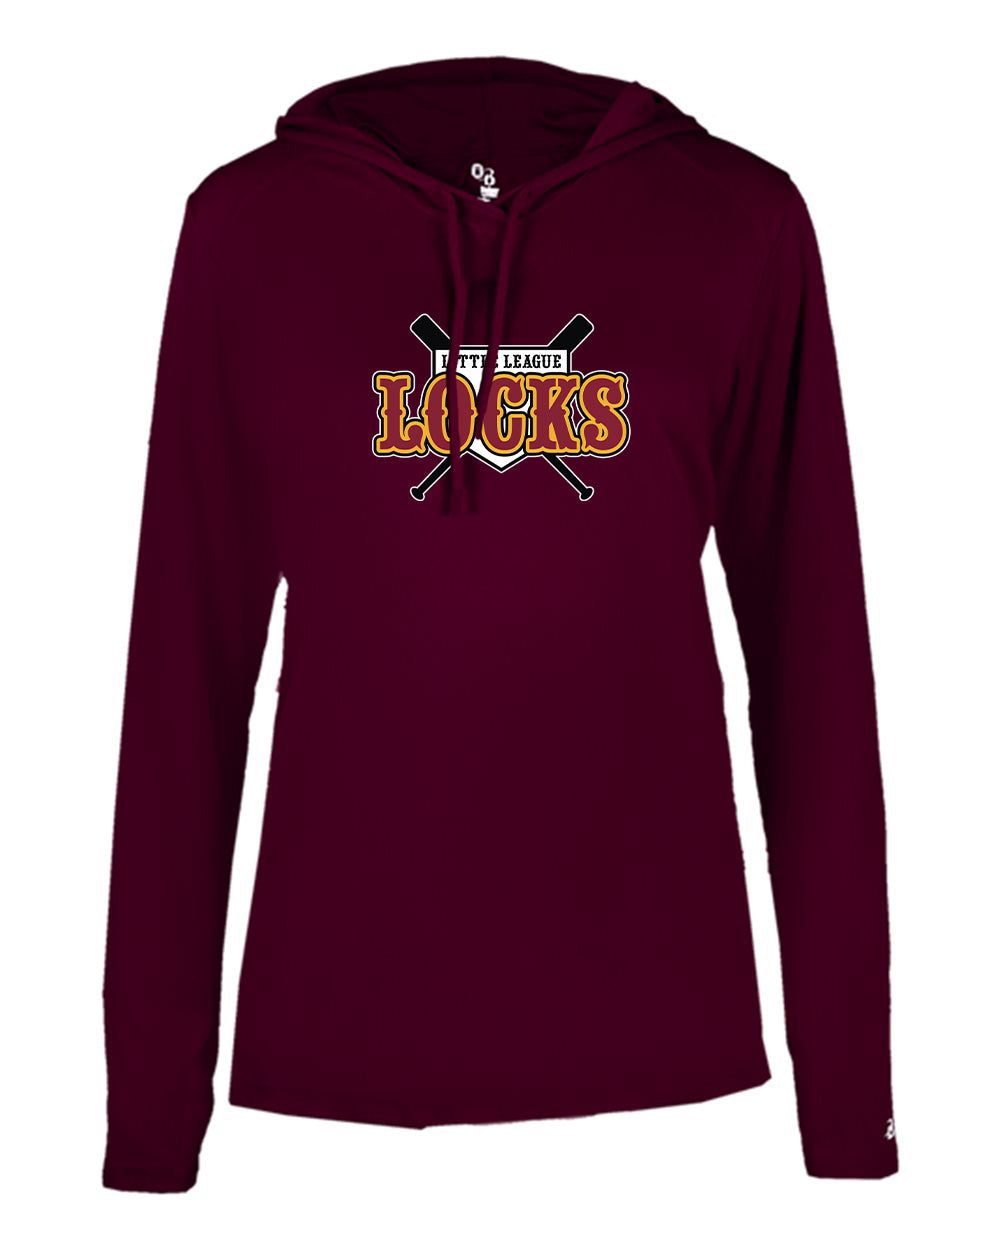 Locks LL Ladies Badger Hooded LS T-shirt "Classic" - 4165 (color options available)